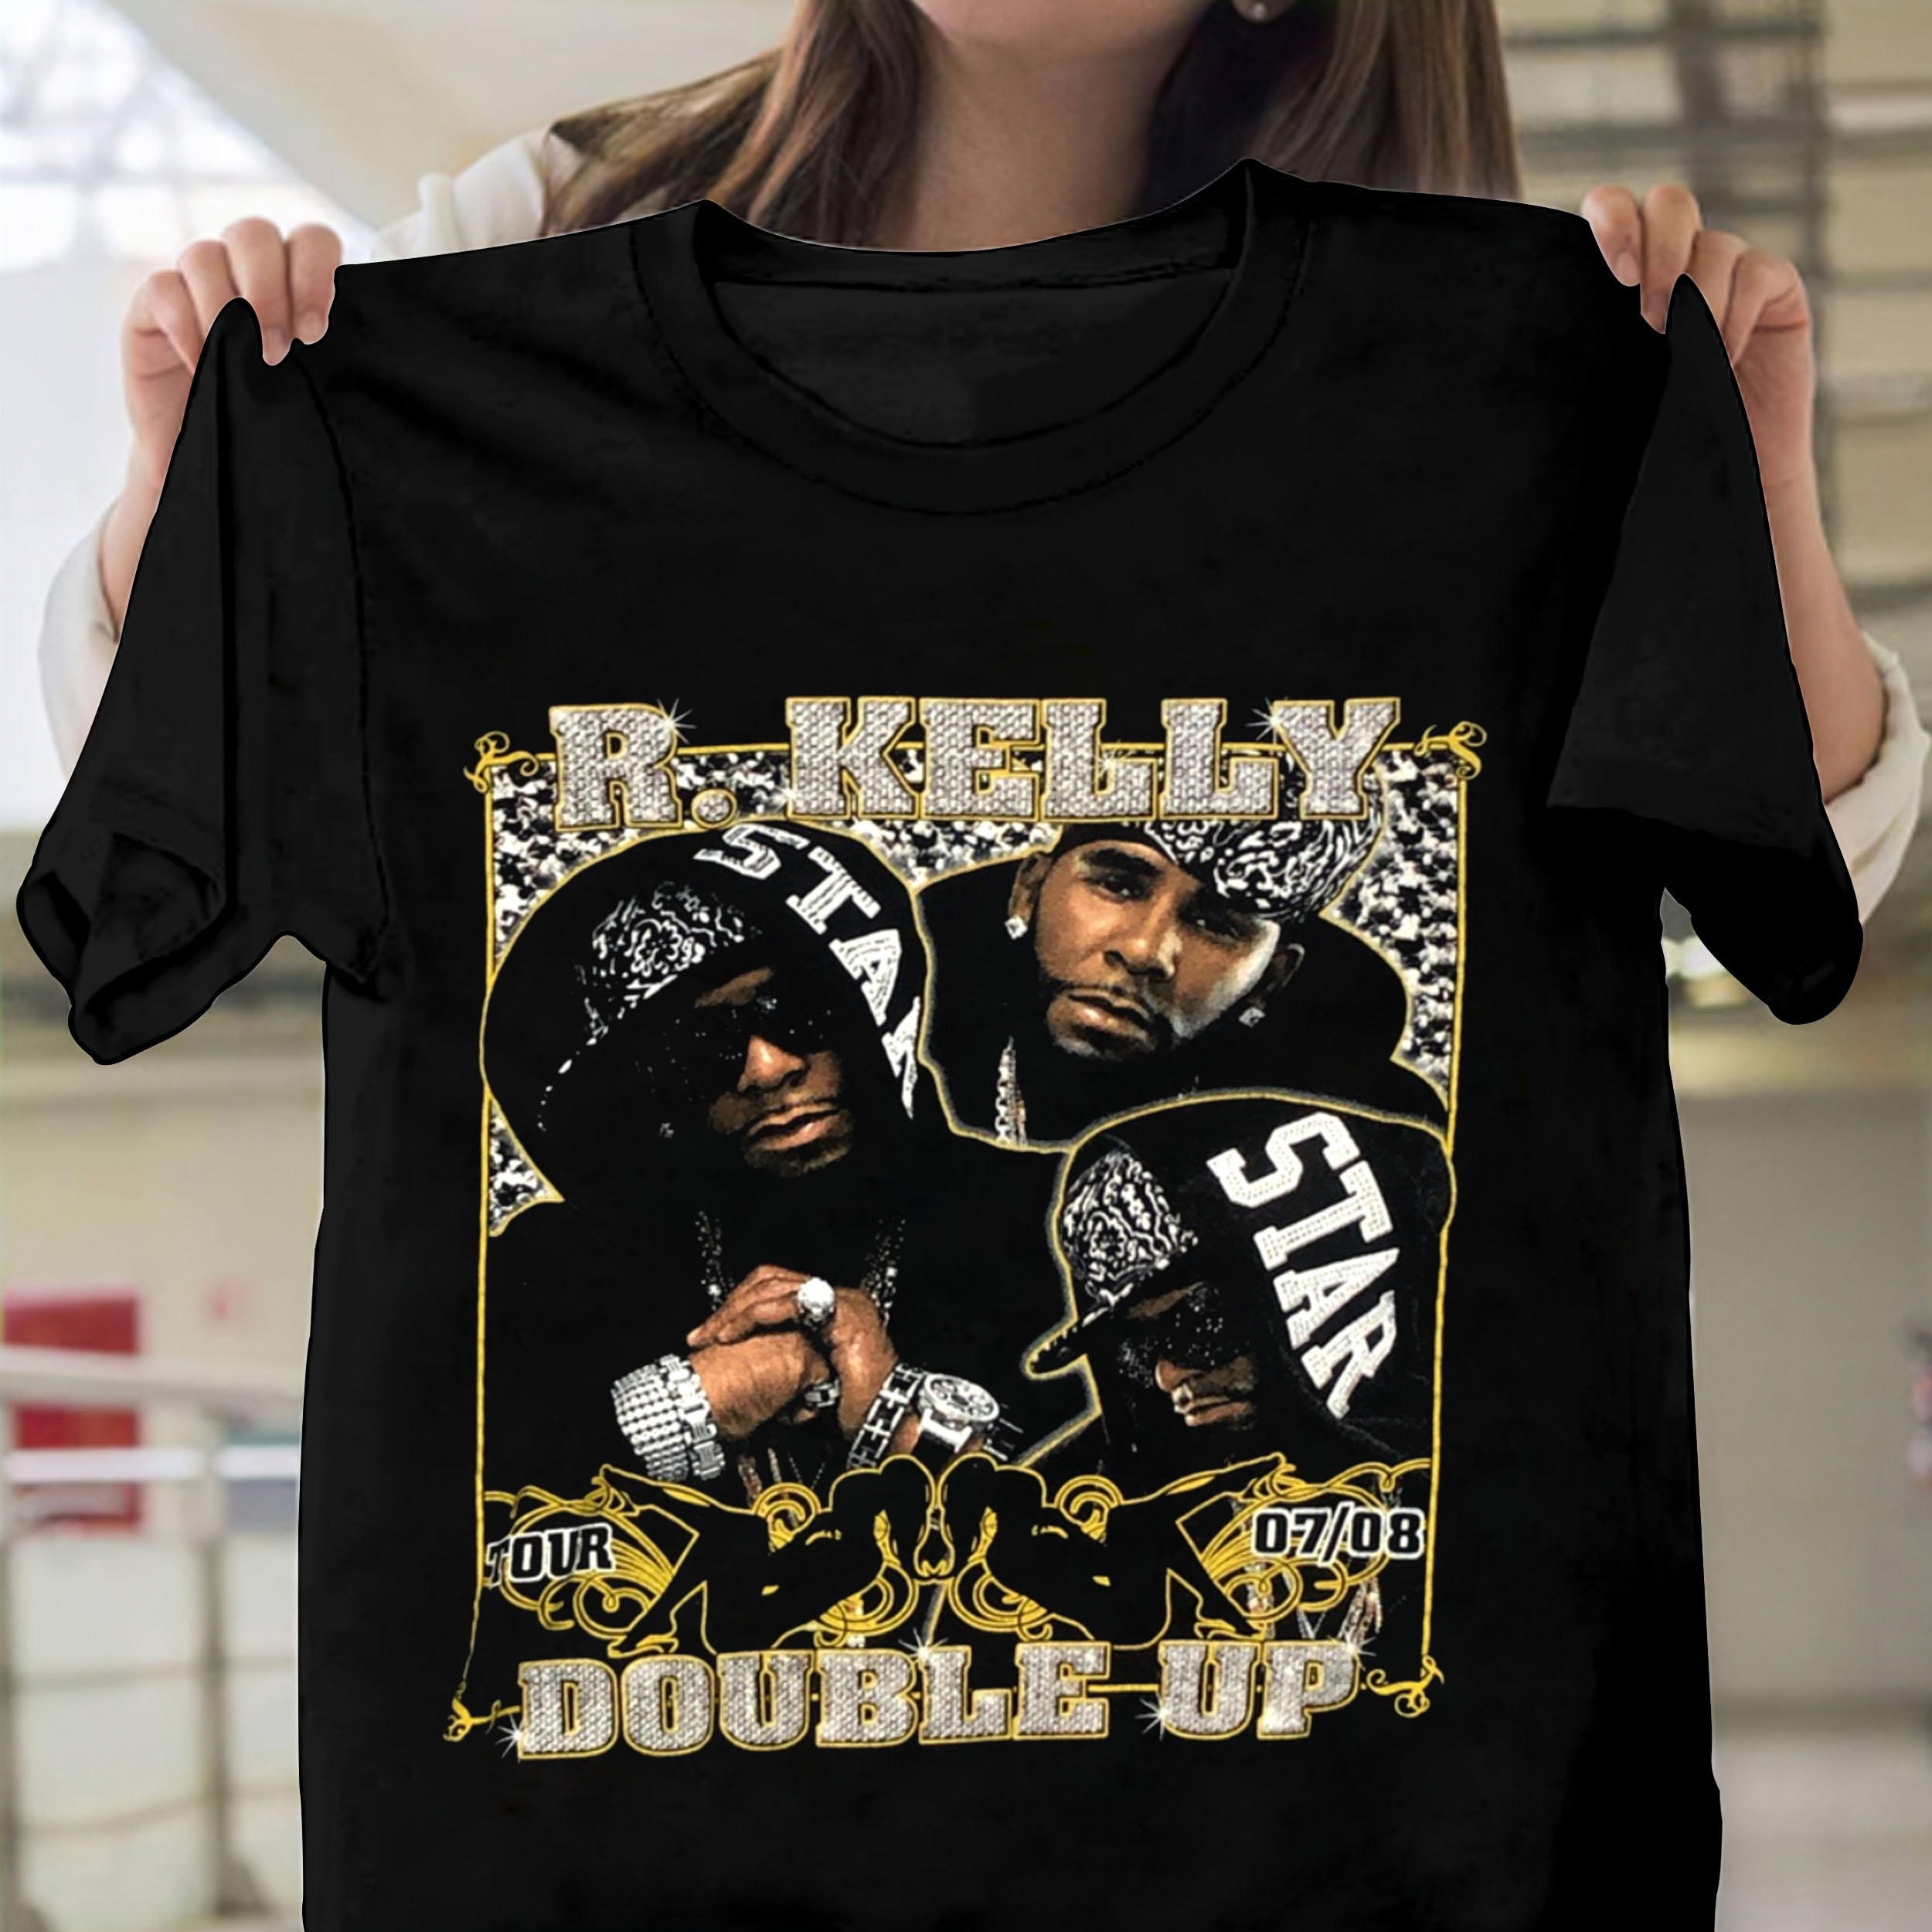 r kelly double up shirt